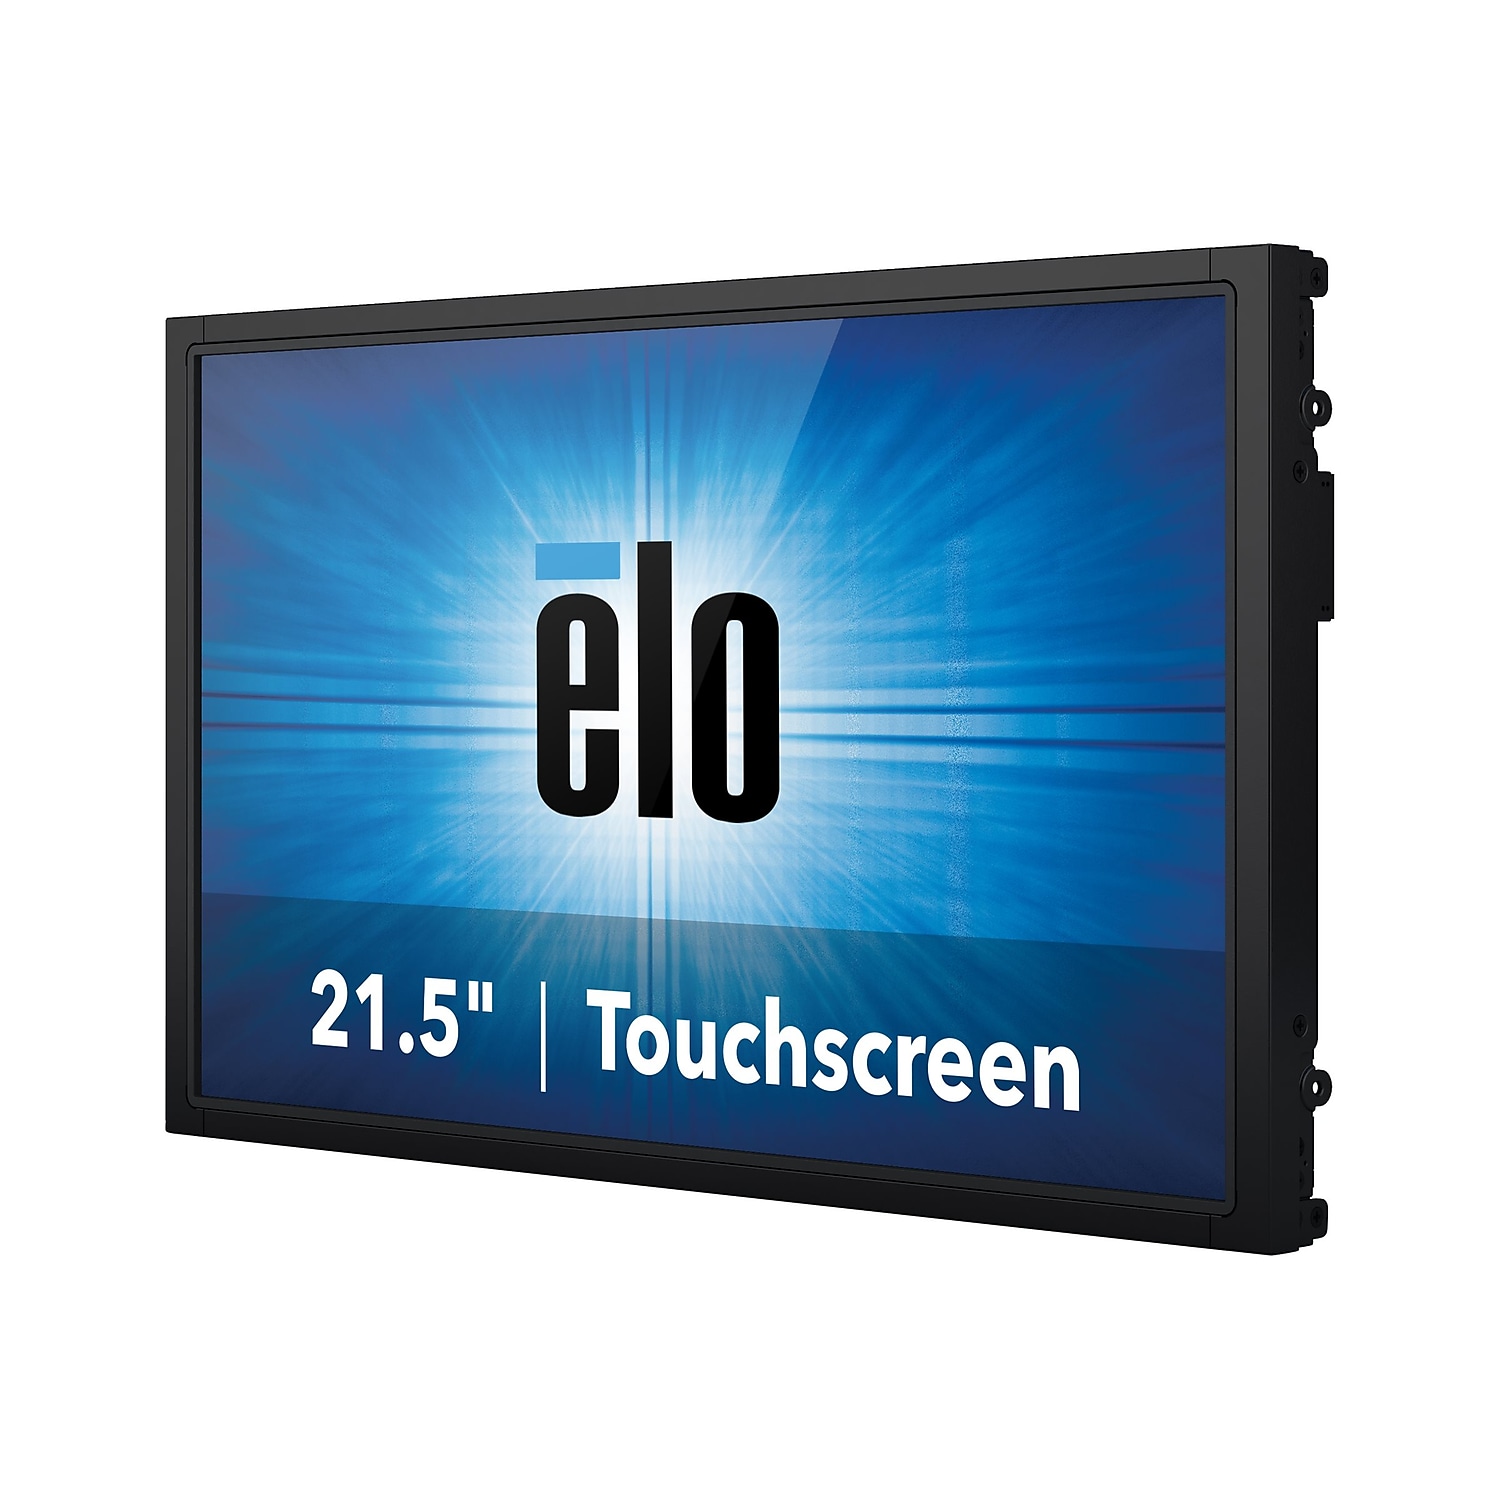 Elo 2294L 21.5" Open-frame LCD Touchscreen Monitor - 16:9 - 14 ms - image 4 of 5